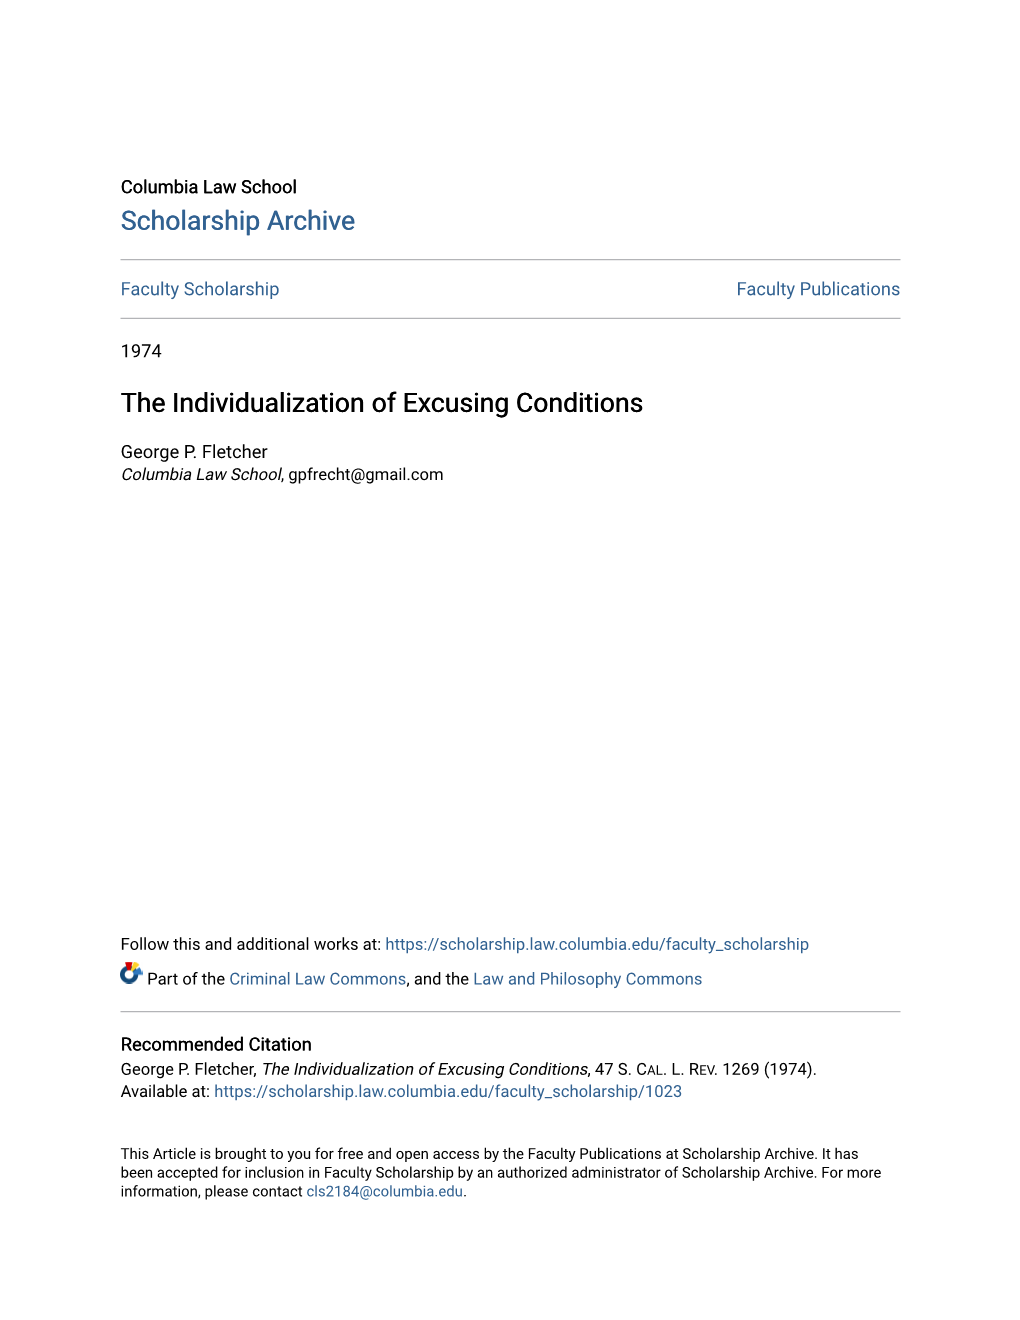 The Individualization of Excusing Conditions